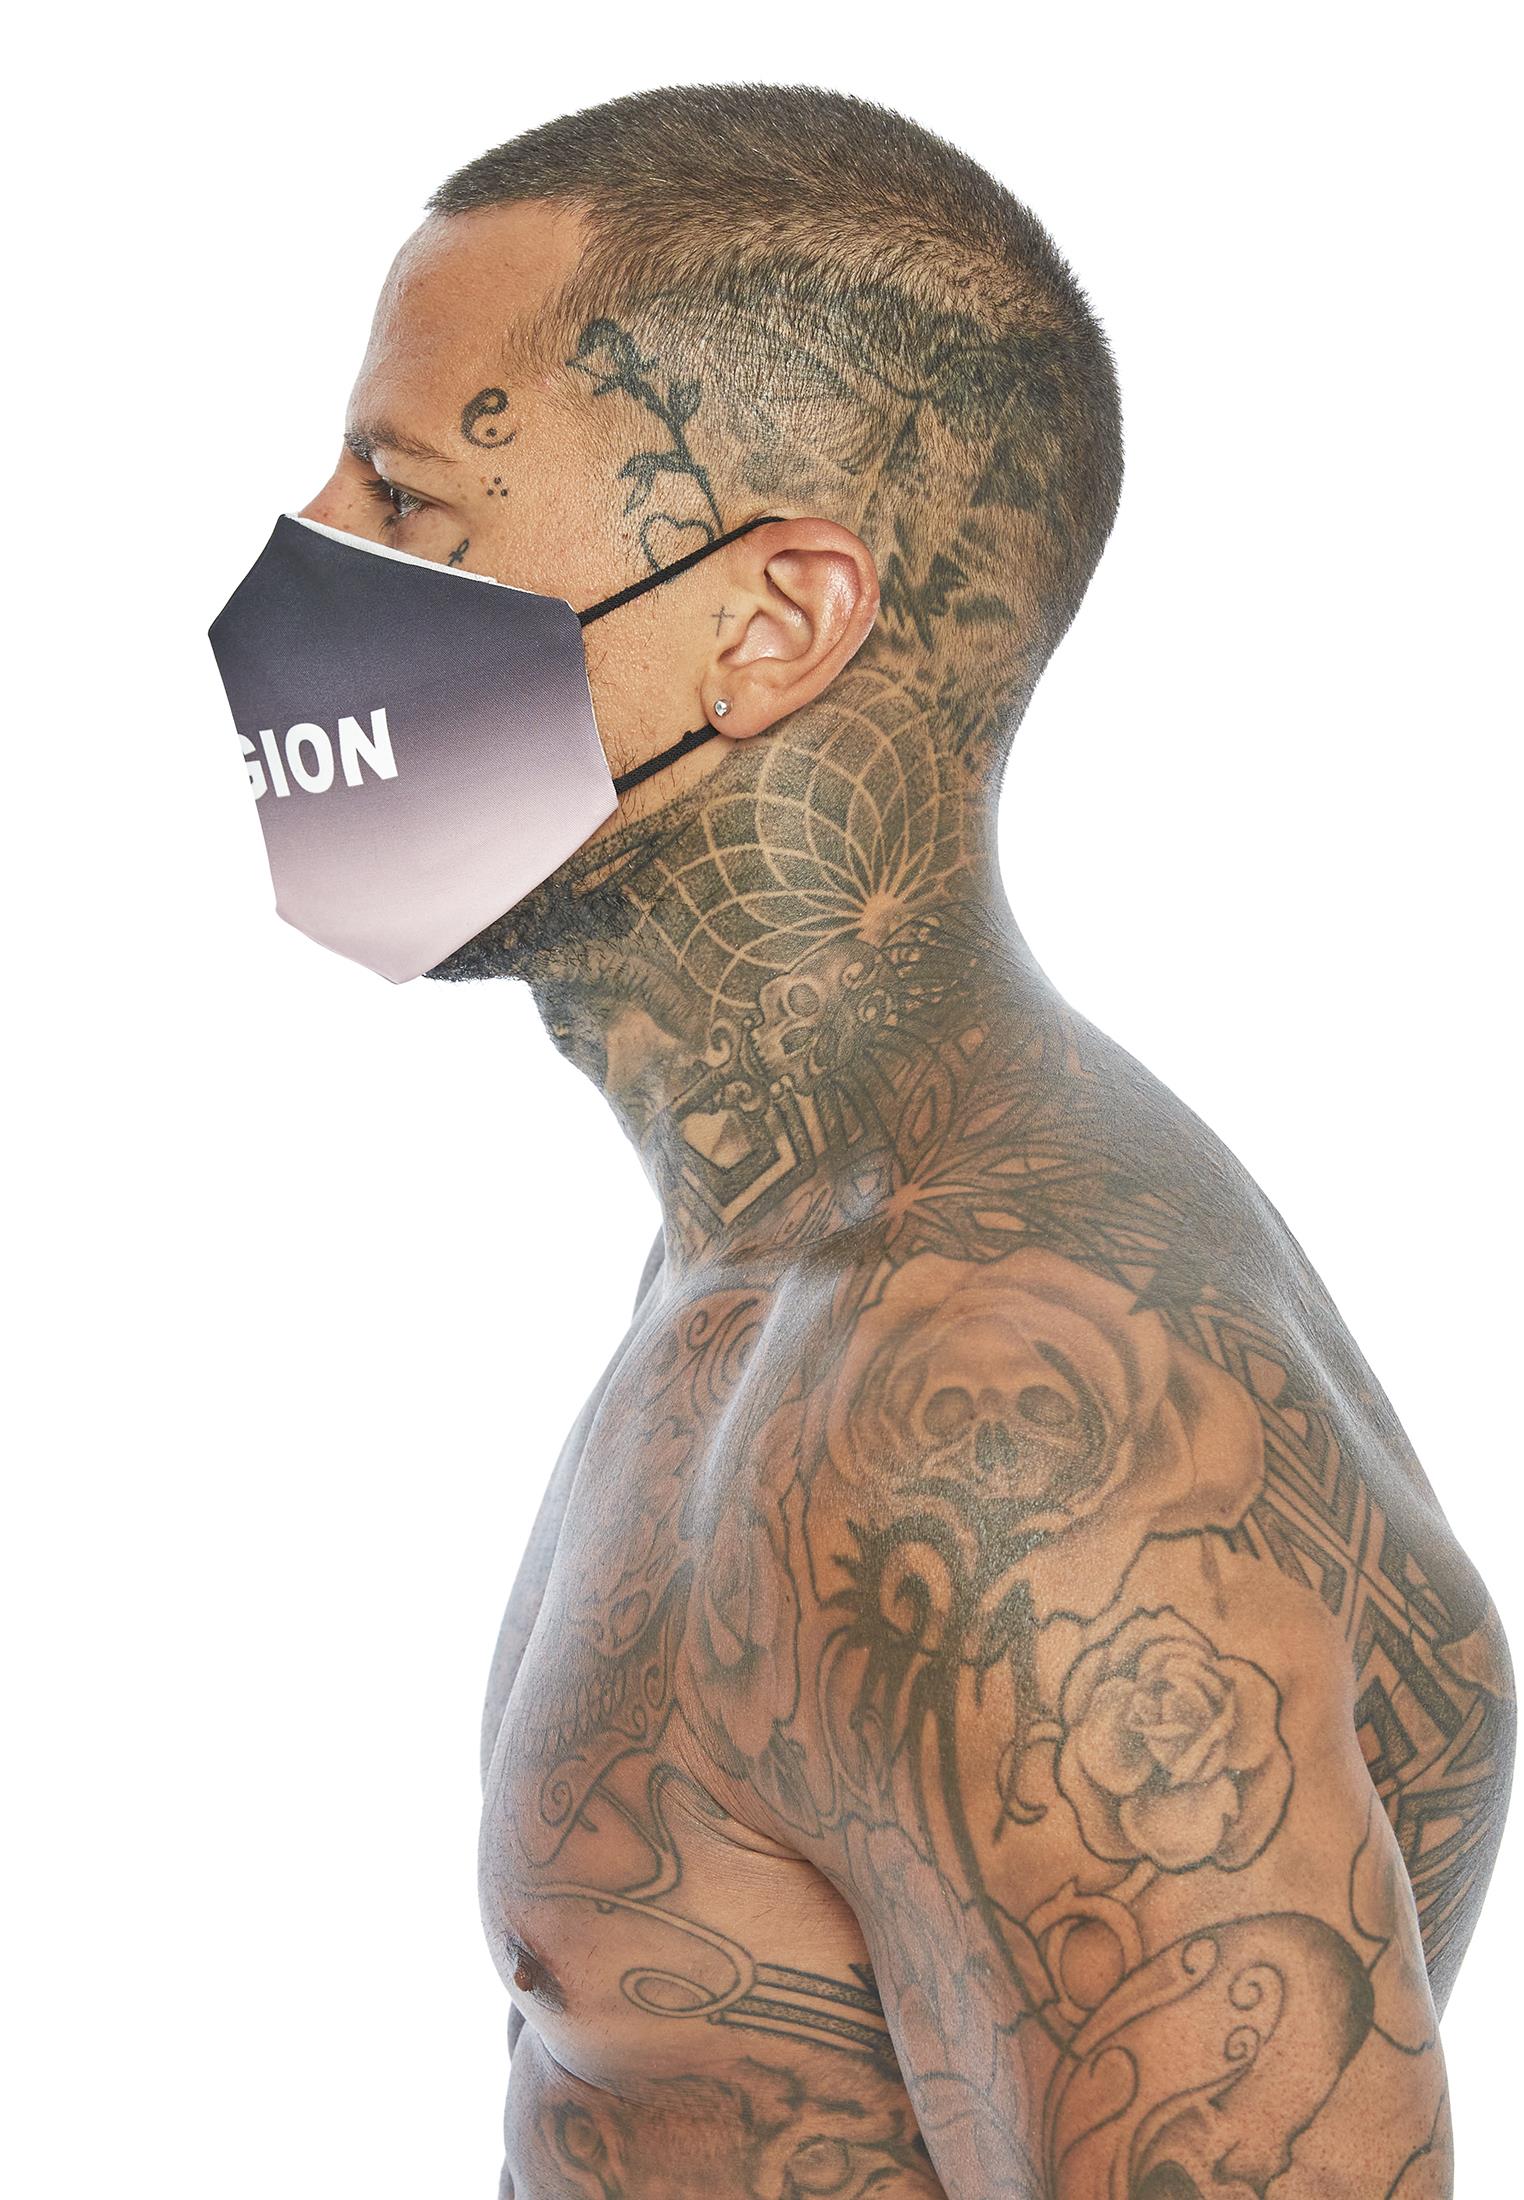 RELIGION Face Mask Gradient Pink Print